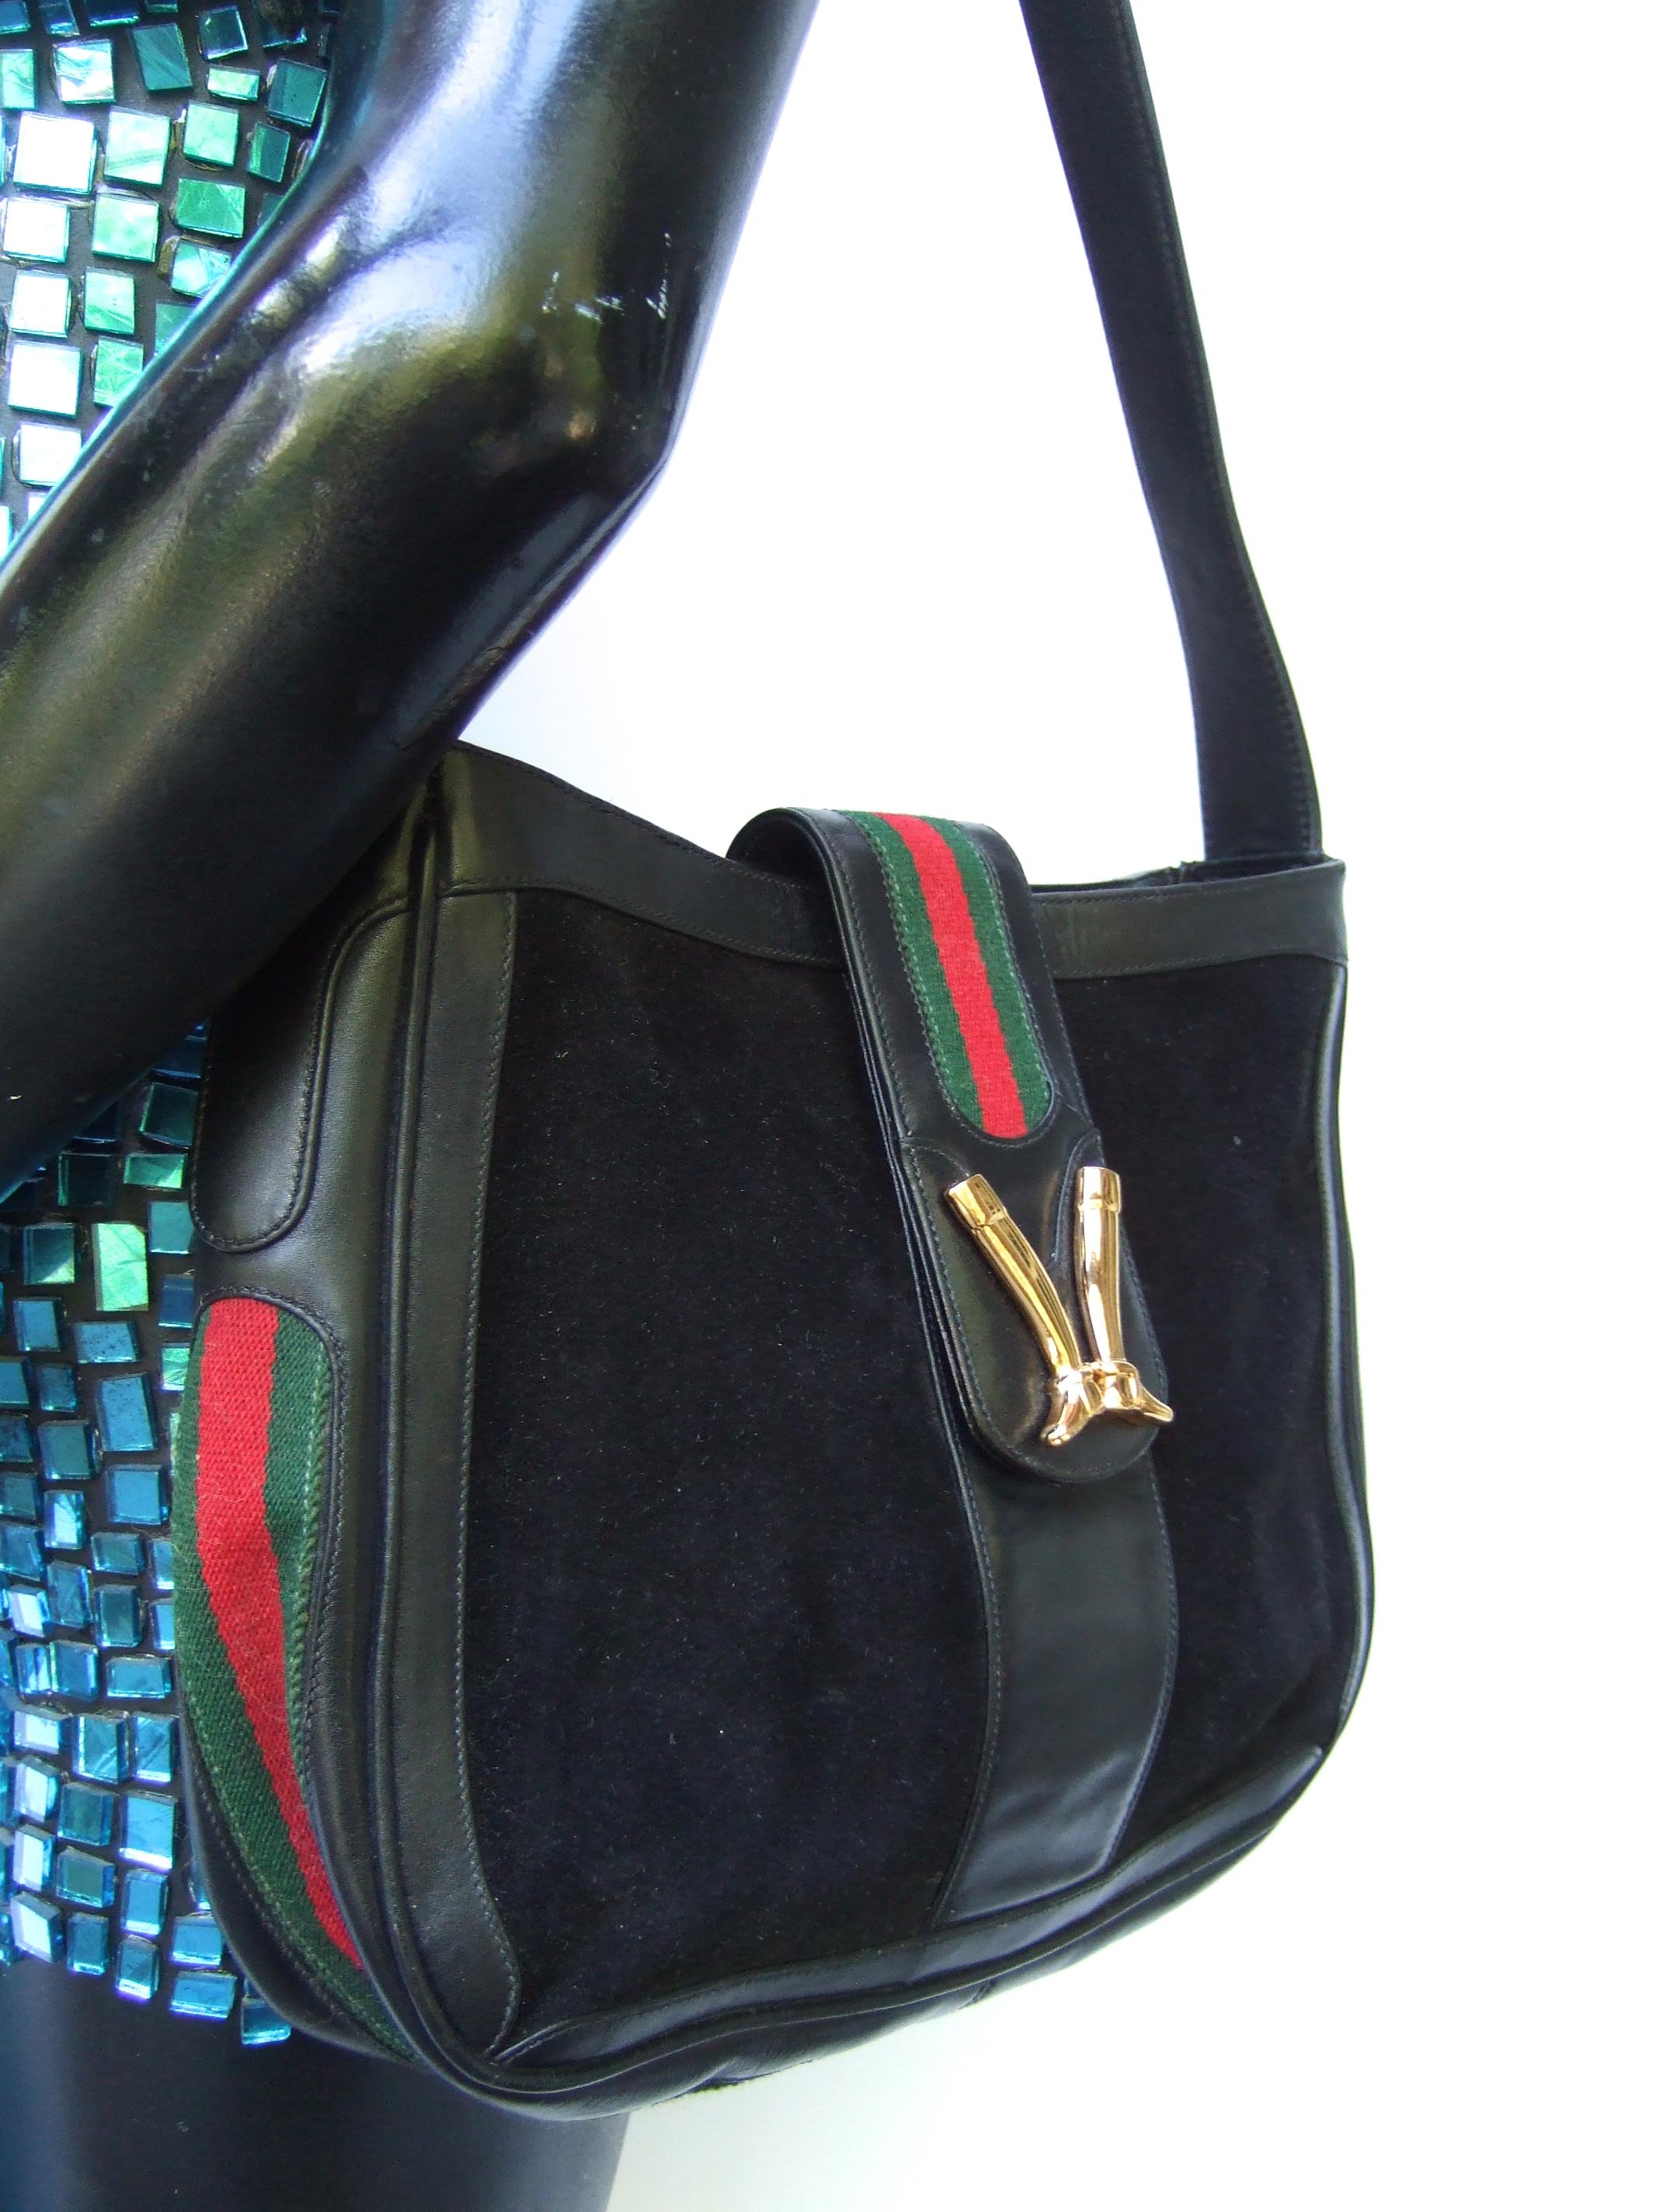 Gucci Italy Rare Black Suede Boot Emblem Shoulder Bag c 1970s In Good Condition For Sale In University City, MO